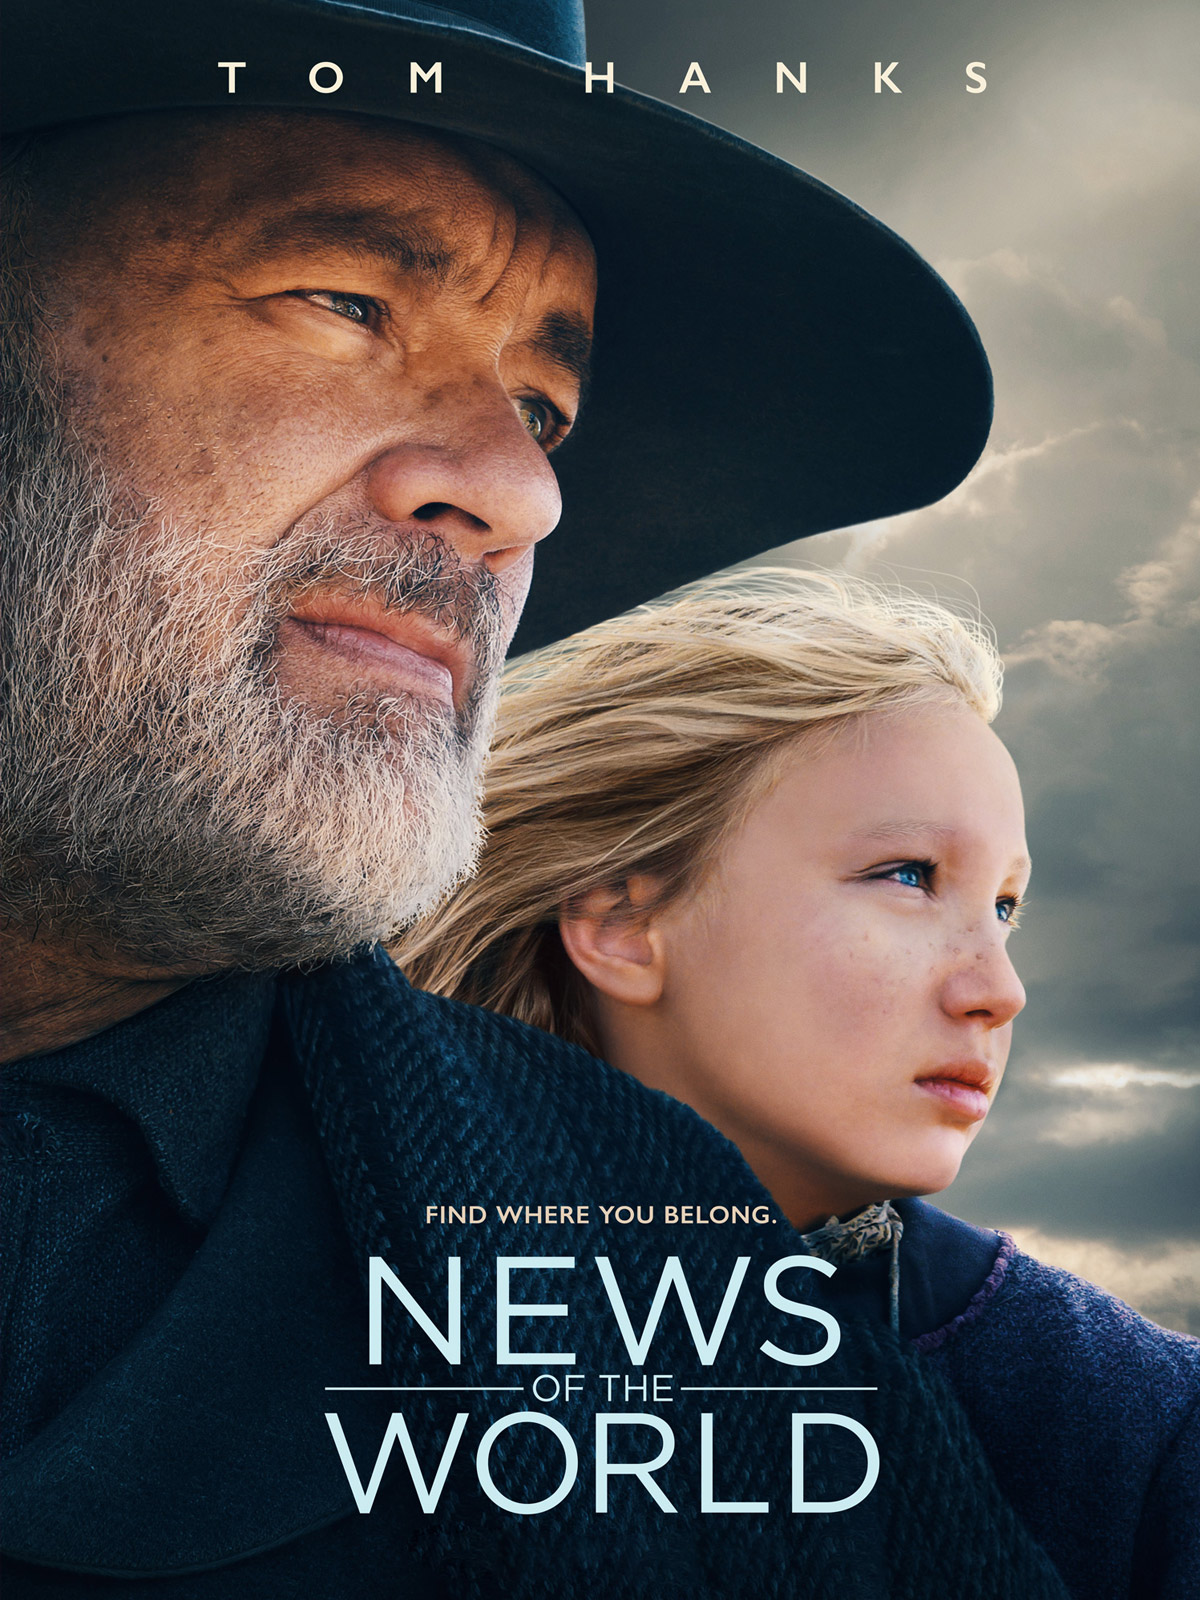 News of the World movie poster.